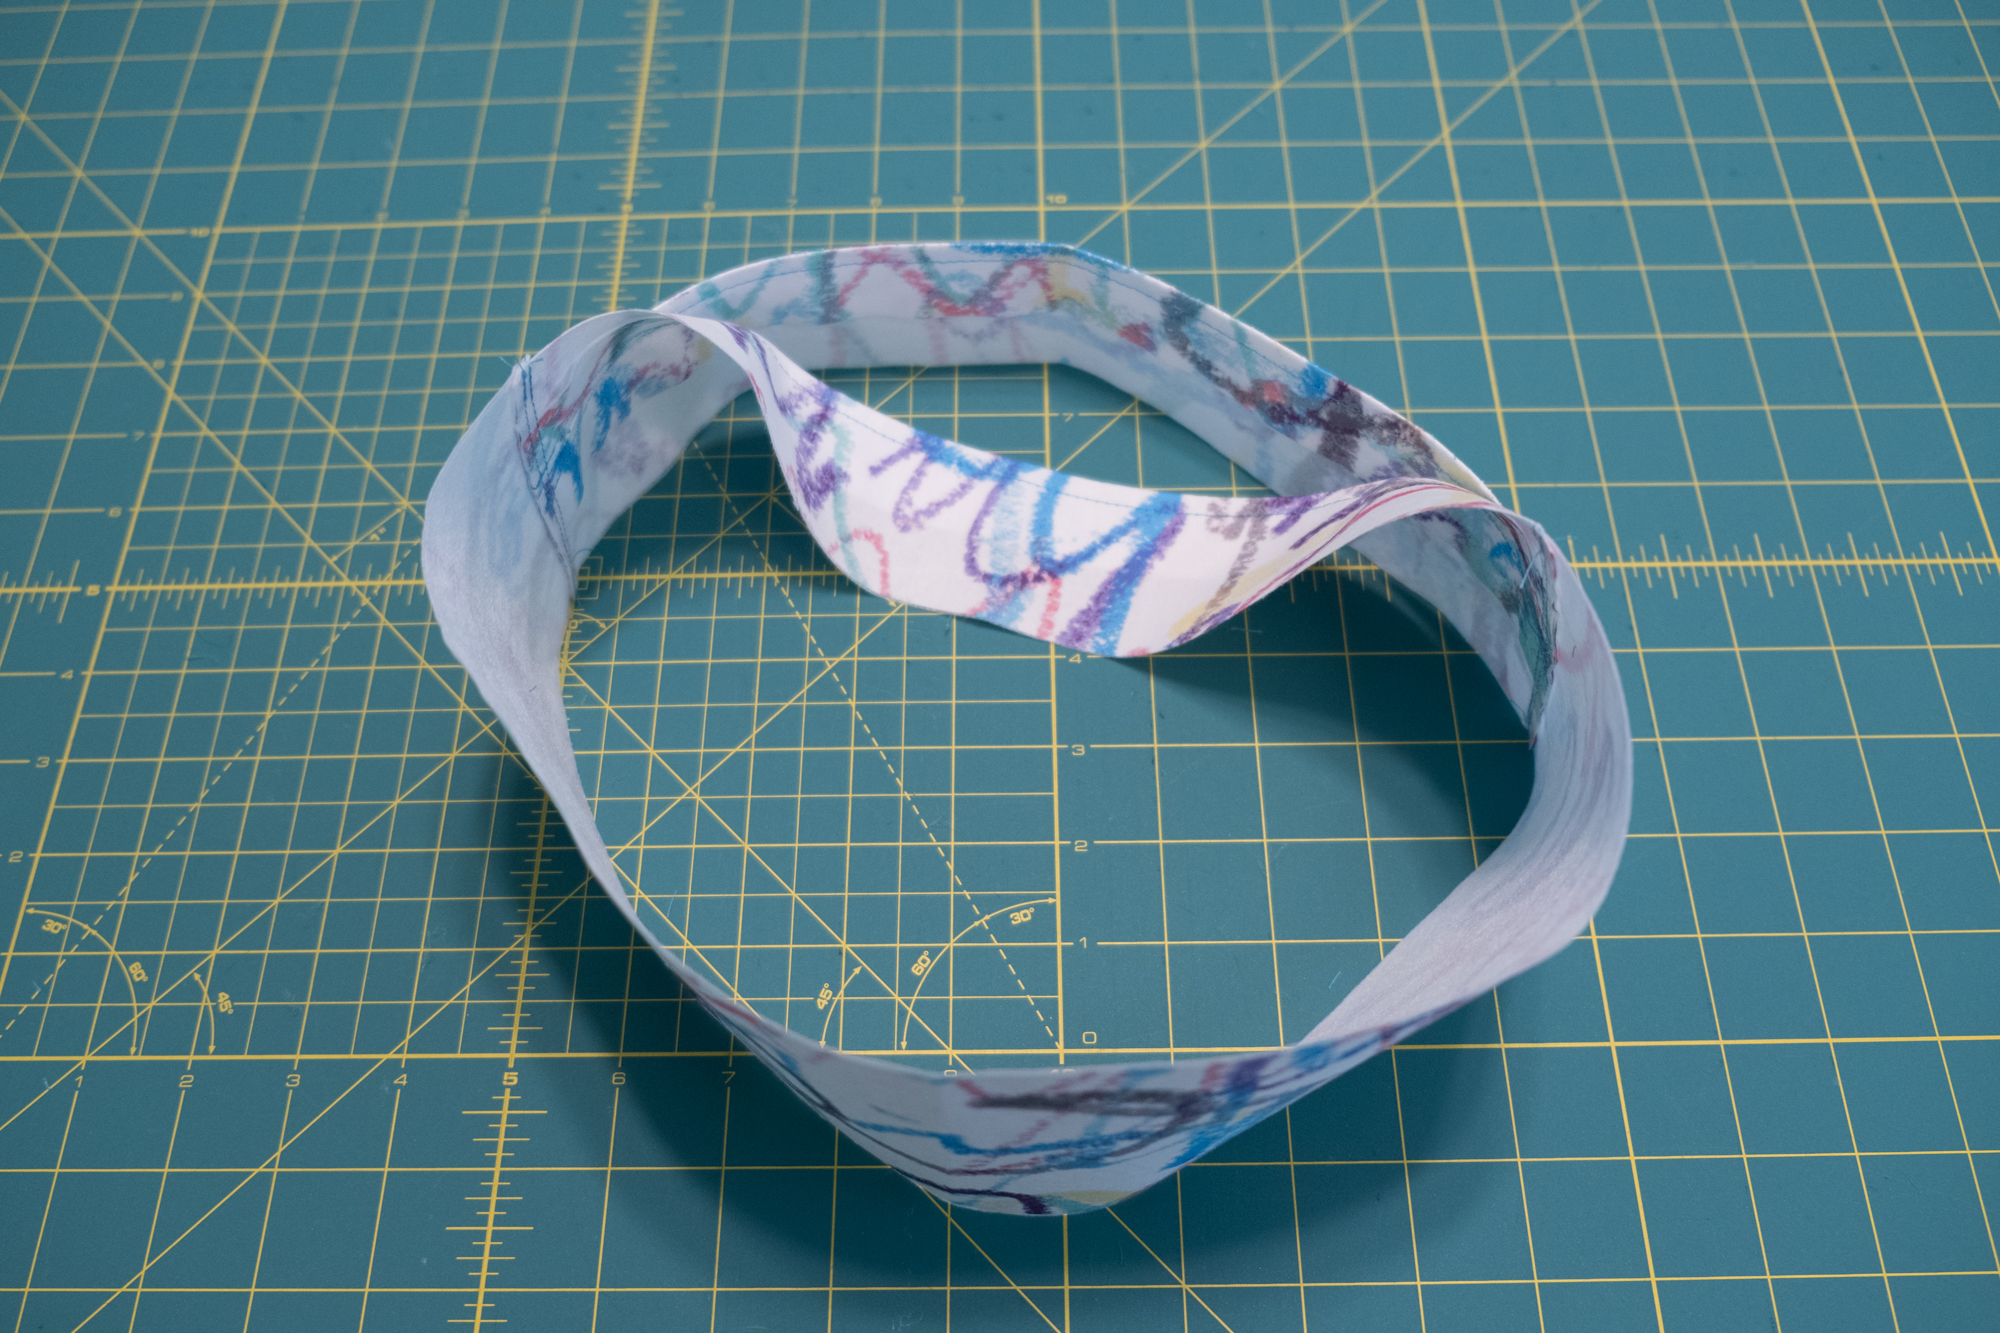 Stitch the ends together to make a circle | Spoonflower Blog